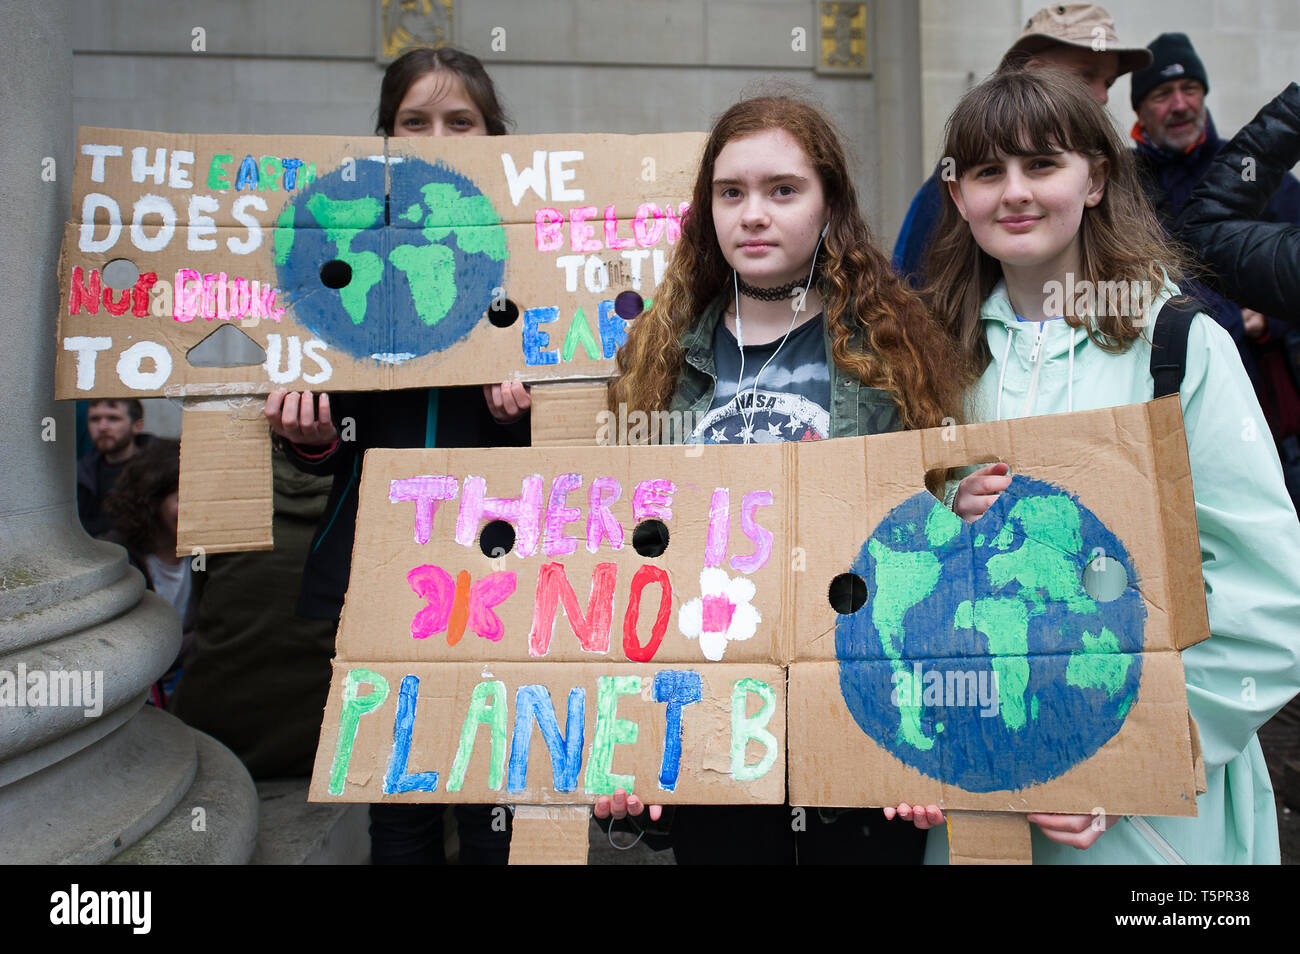 Manchester, UK. 26th Apr, 2019. Young activists seen with climate change placards during the weekly Extinction Rebellion protest outside Manchester Central Library.Extinction Rebellion is a socio-political movement which uses nonviolent resistance to protest against climate breakdown, biodiversity loss, and the risk of human extinction and ecological collapse. Credit: Steven Speed/SOPA Images/ZUMA Wire/Alamy Live News Stock Photo